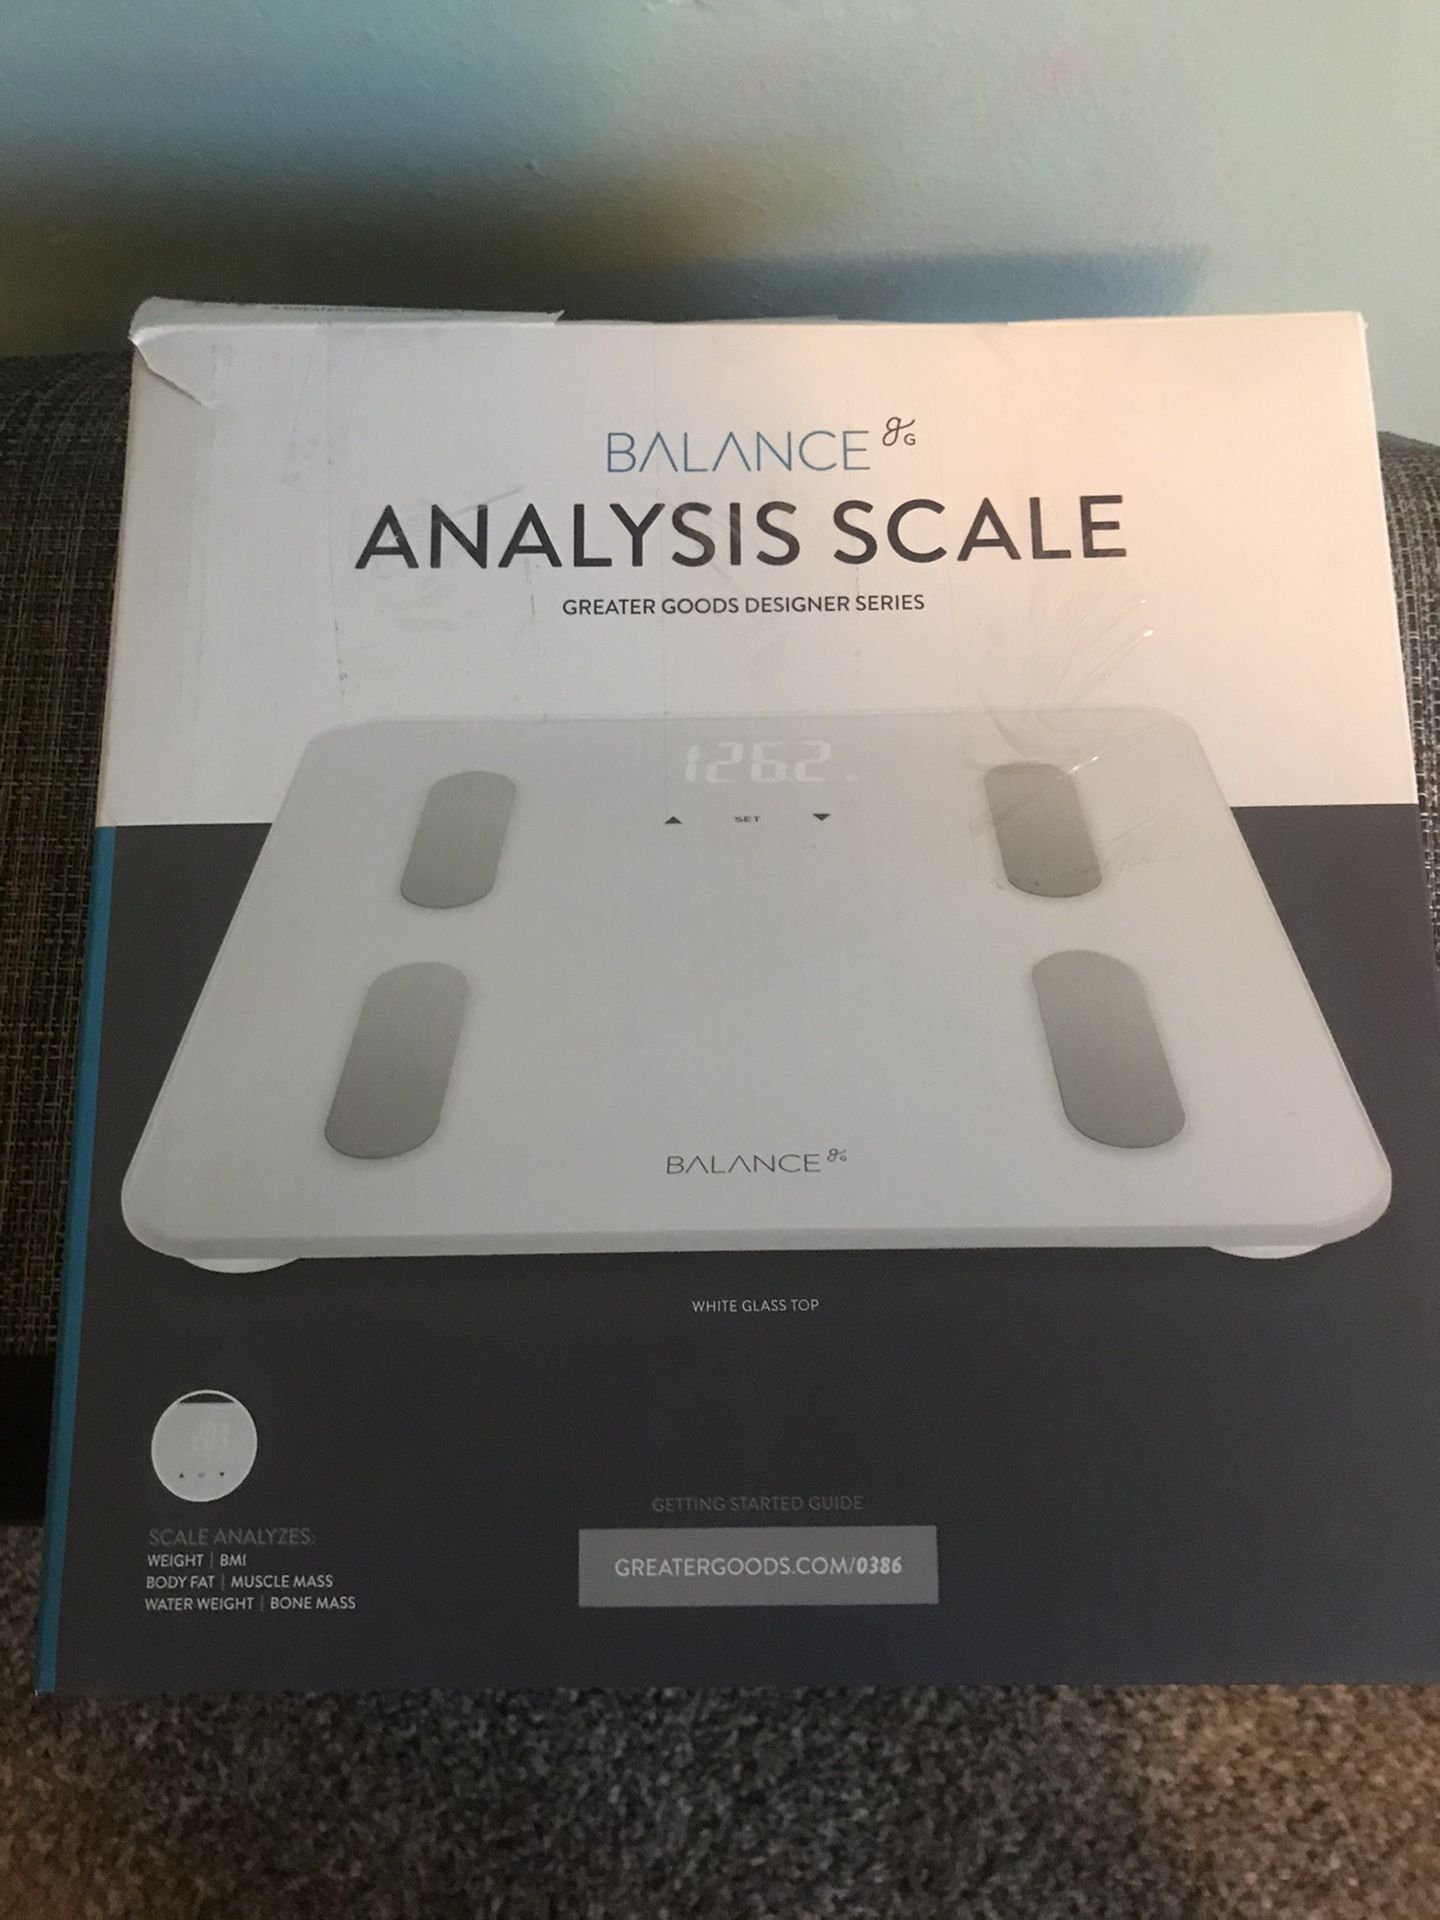 Body analysis scale measures 6 key components of your health